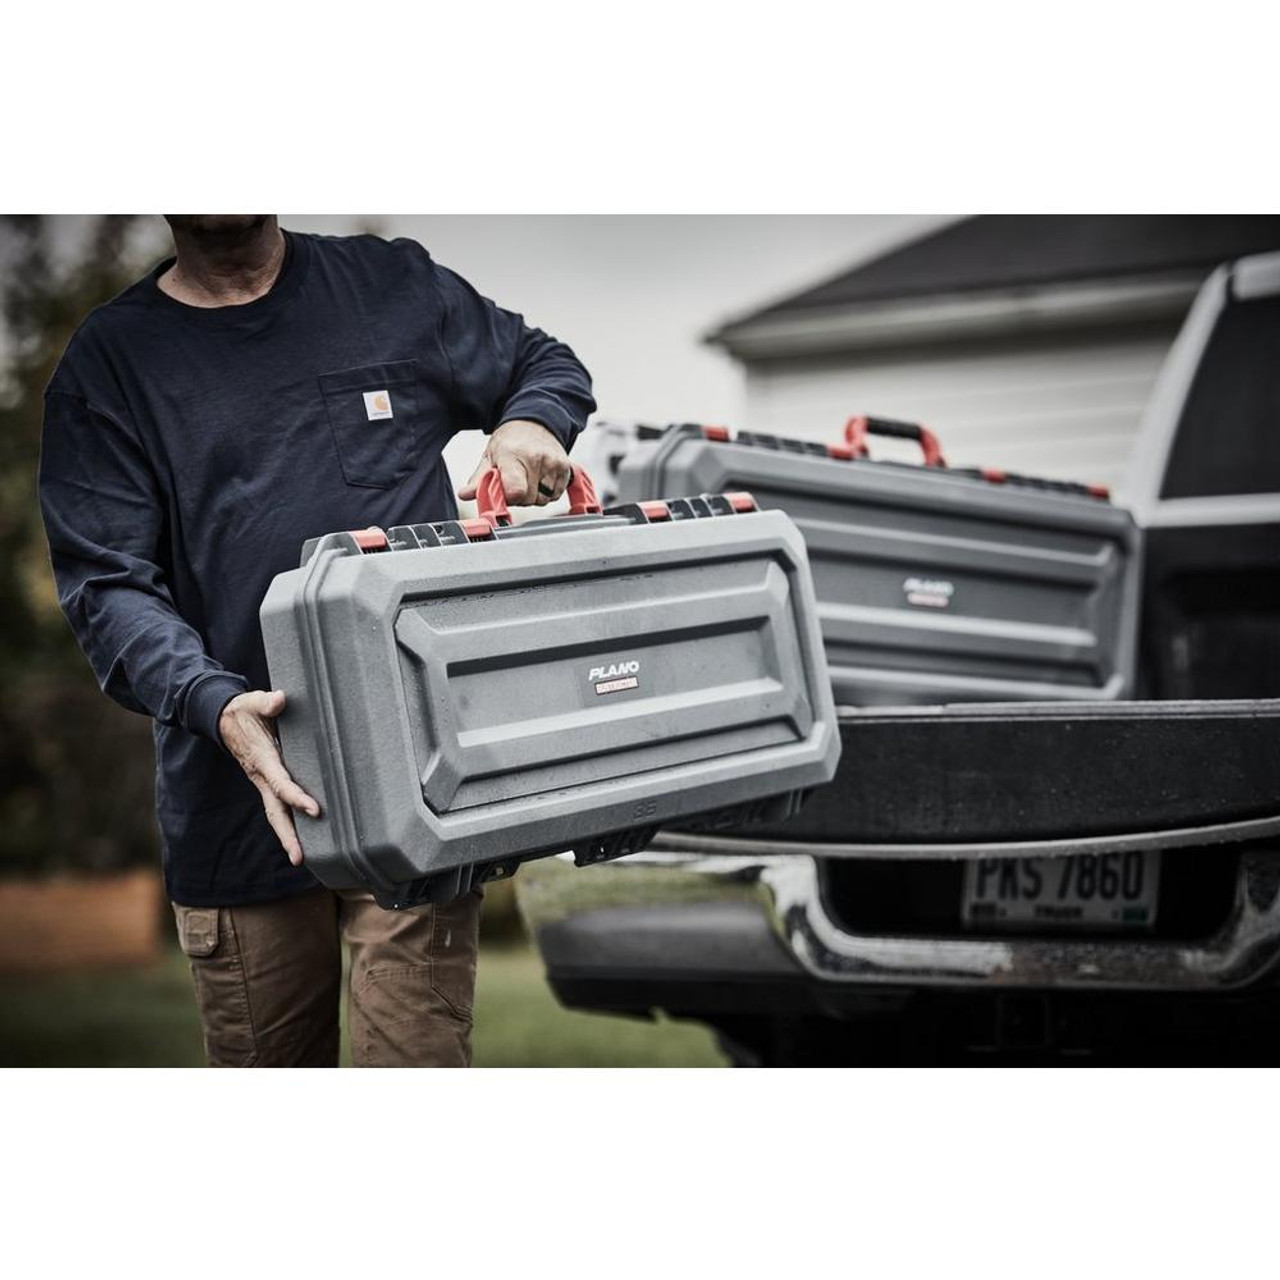  Plano All-Weather Four Pistol Case Watertight & Dust